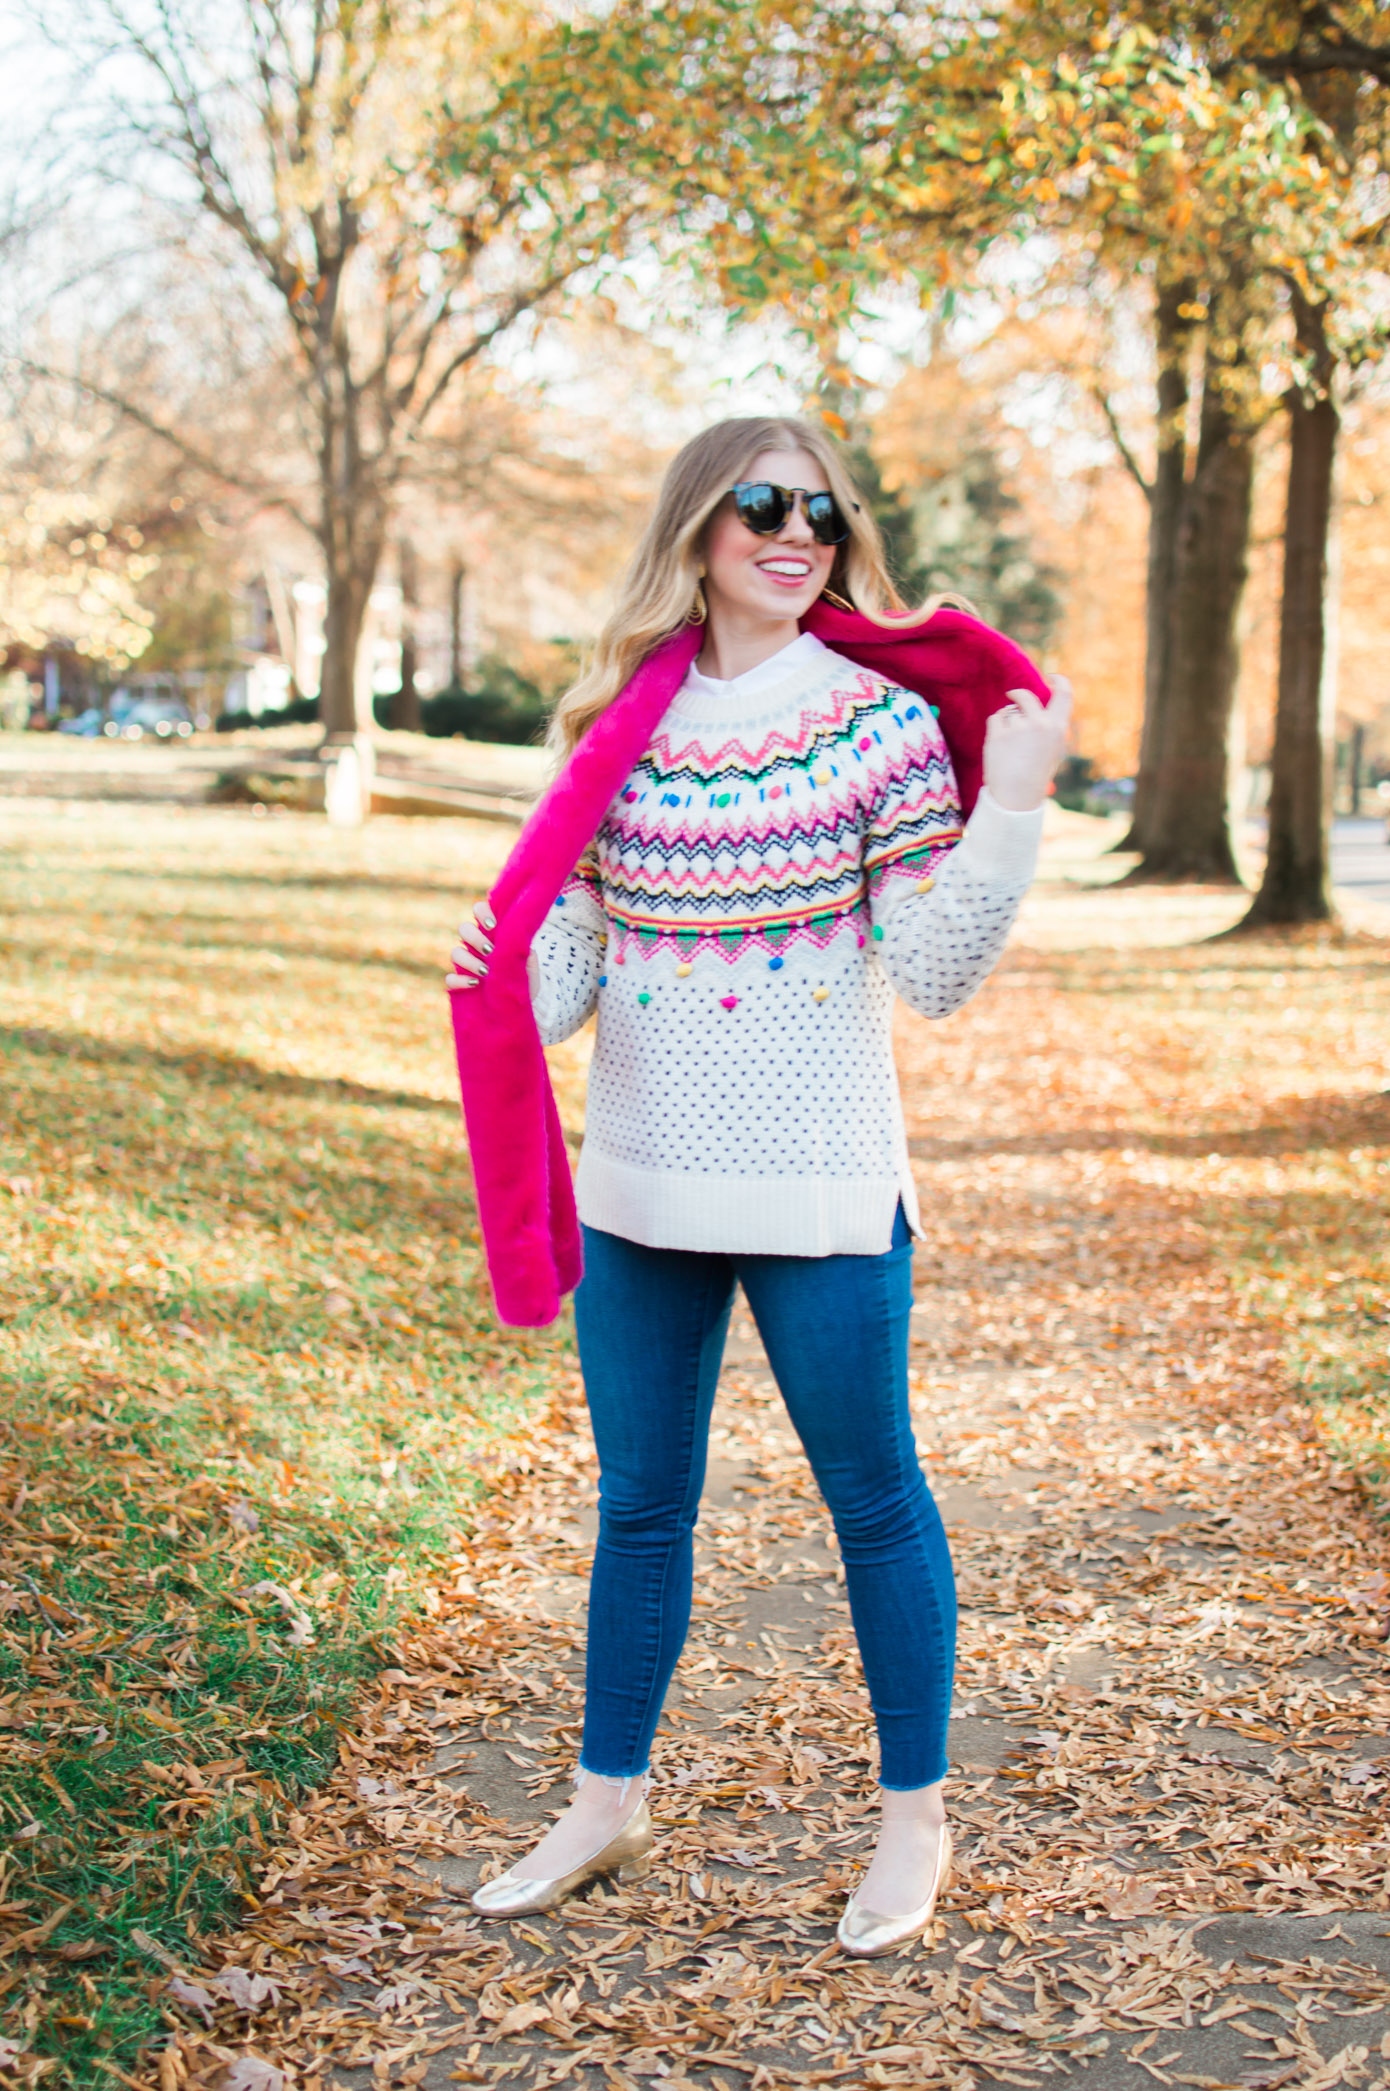 Colorful Fair Isle Sweater | Winter Wardrobe Must Haves | Louella Reese Life & Style Blog